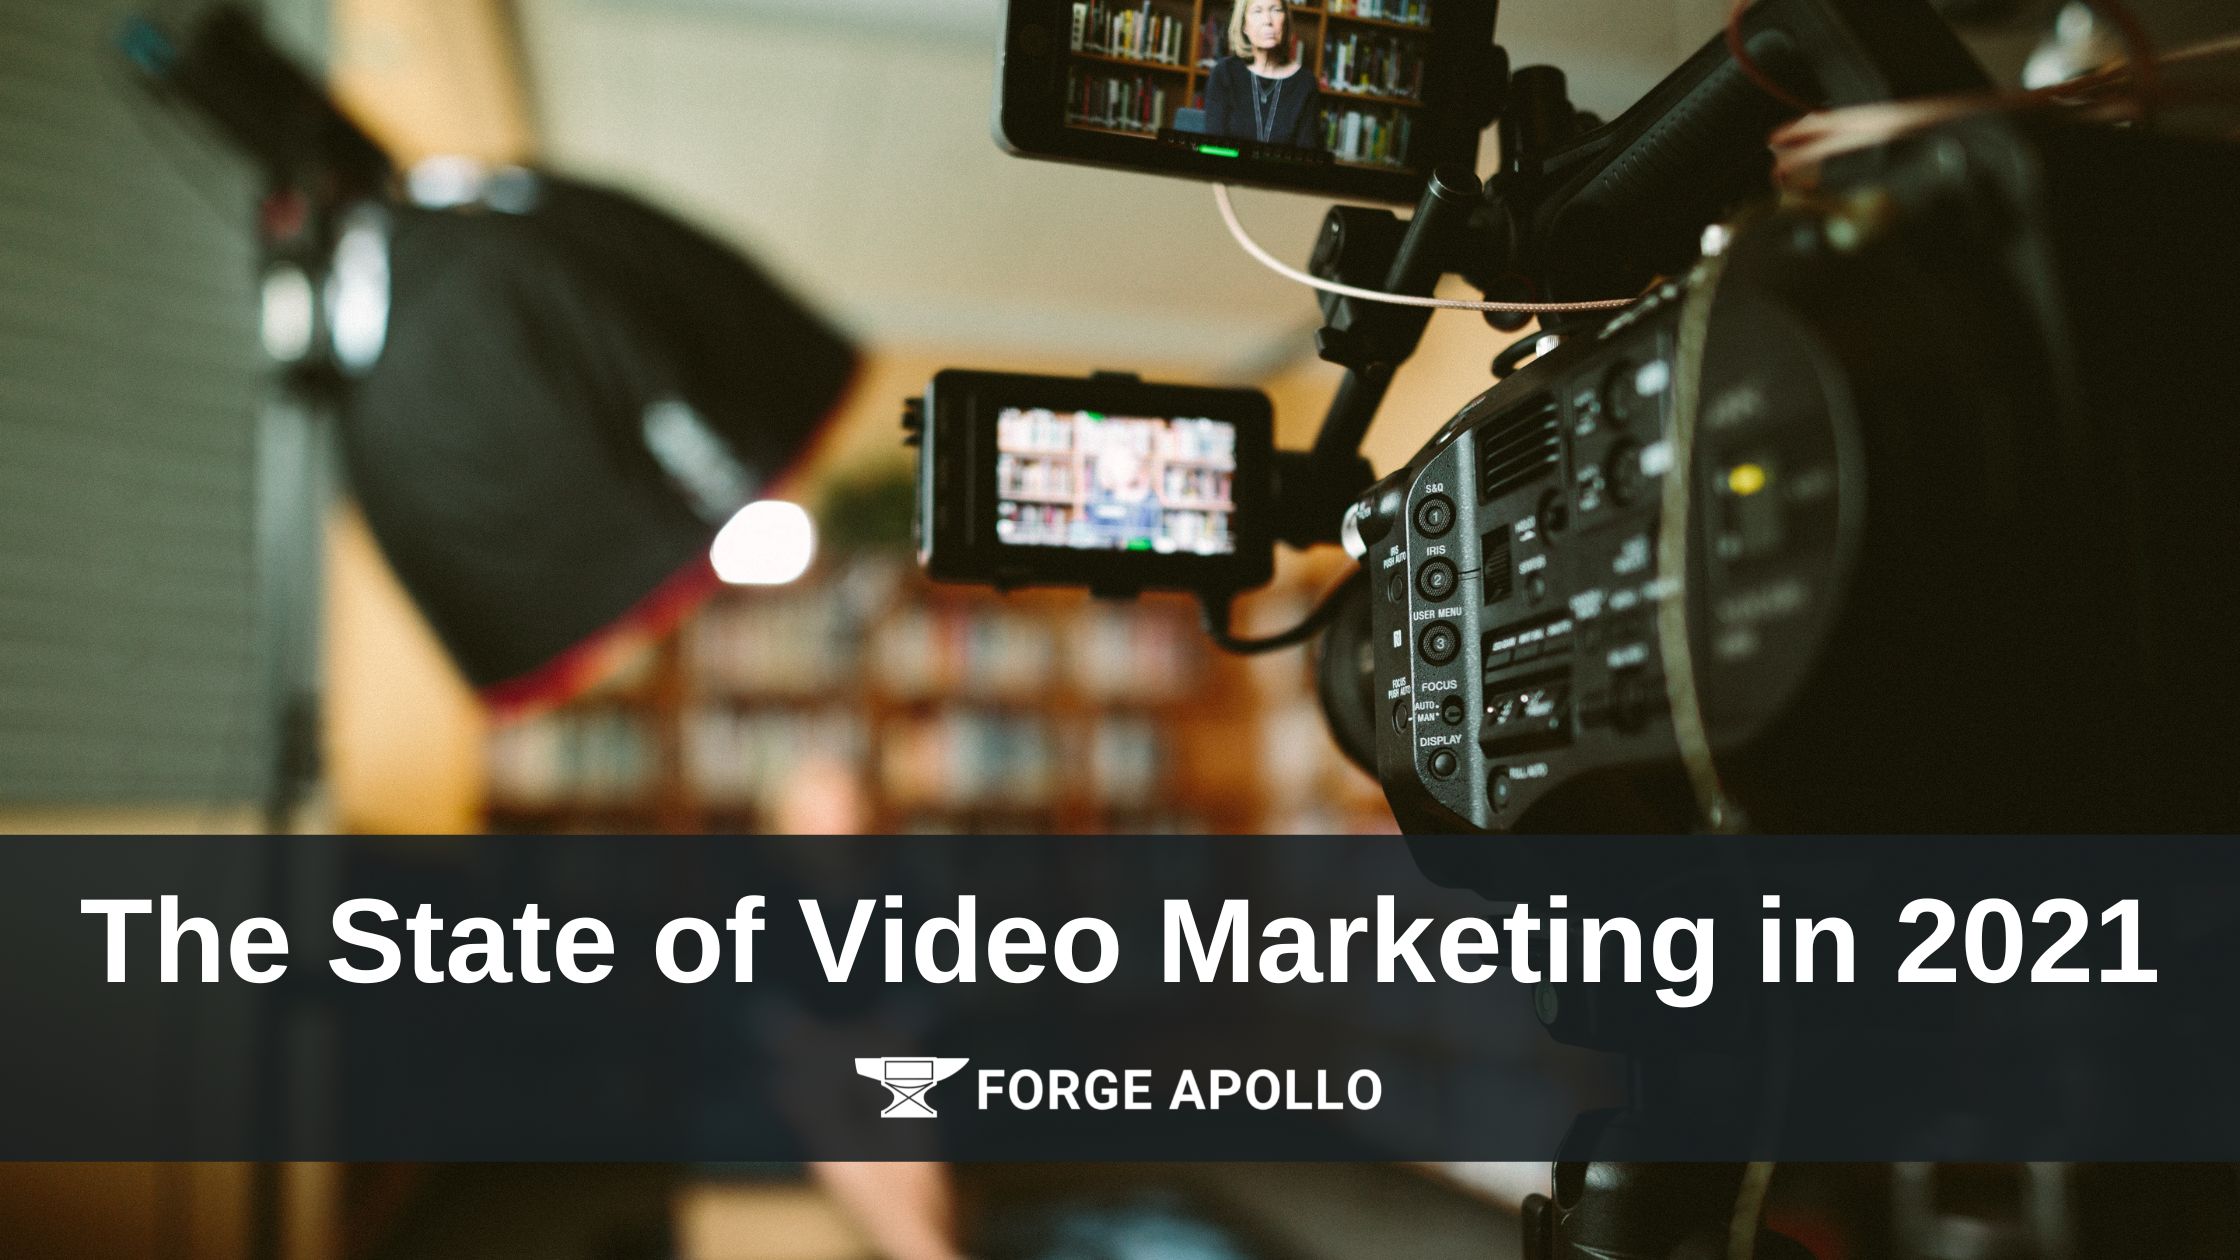 Video camera with the overlaid text "The State of Video Marketing in 2021"